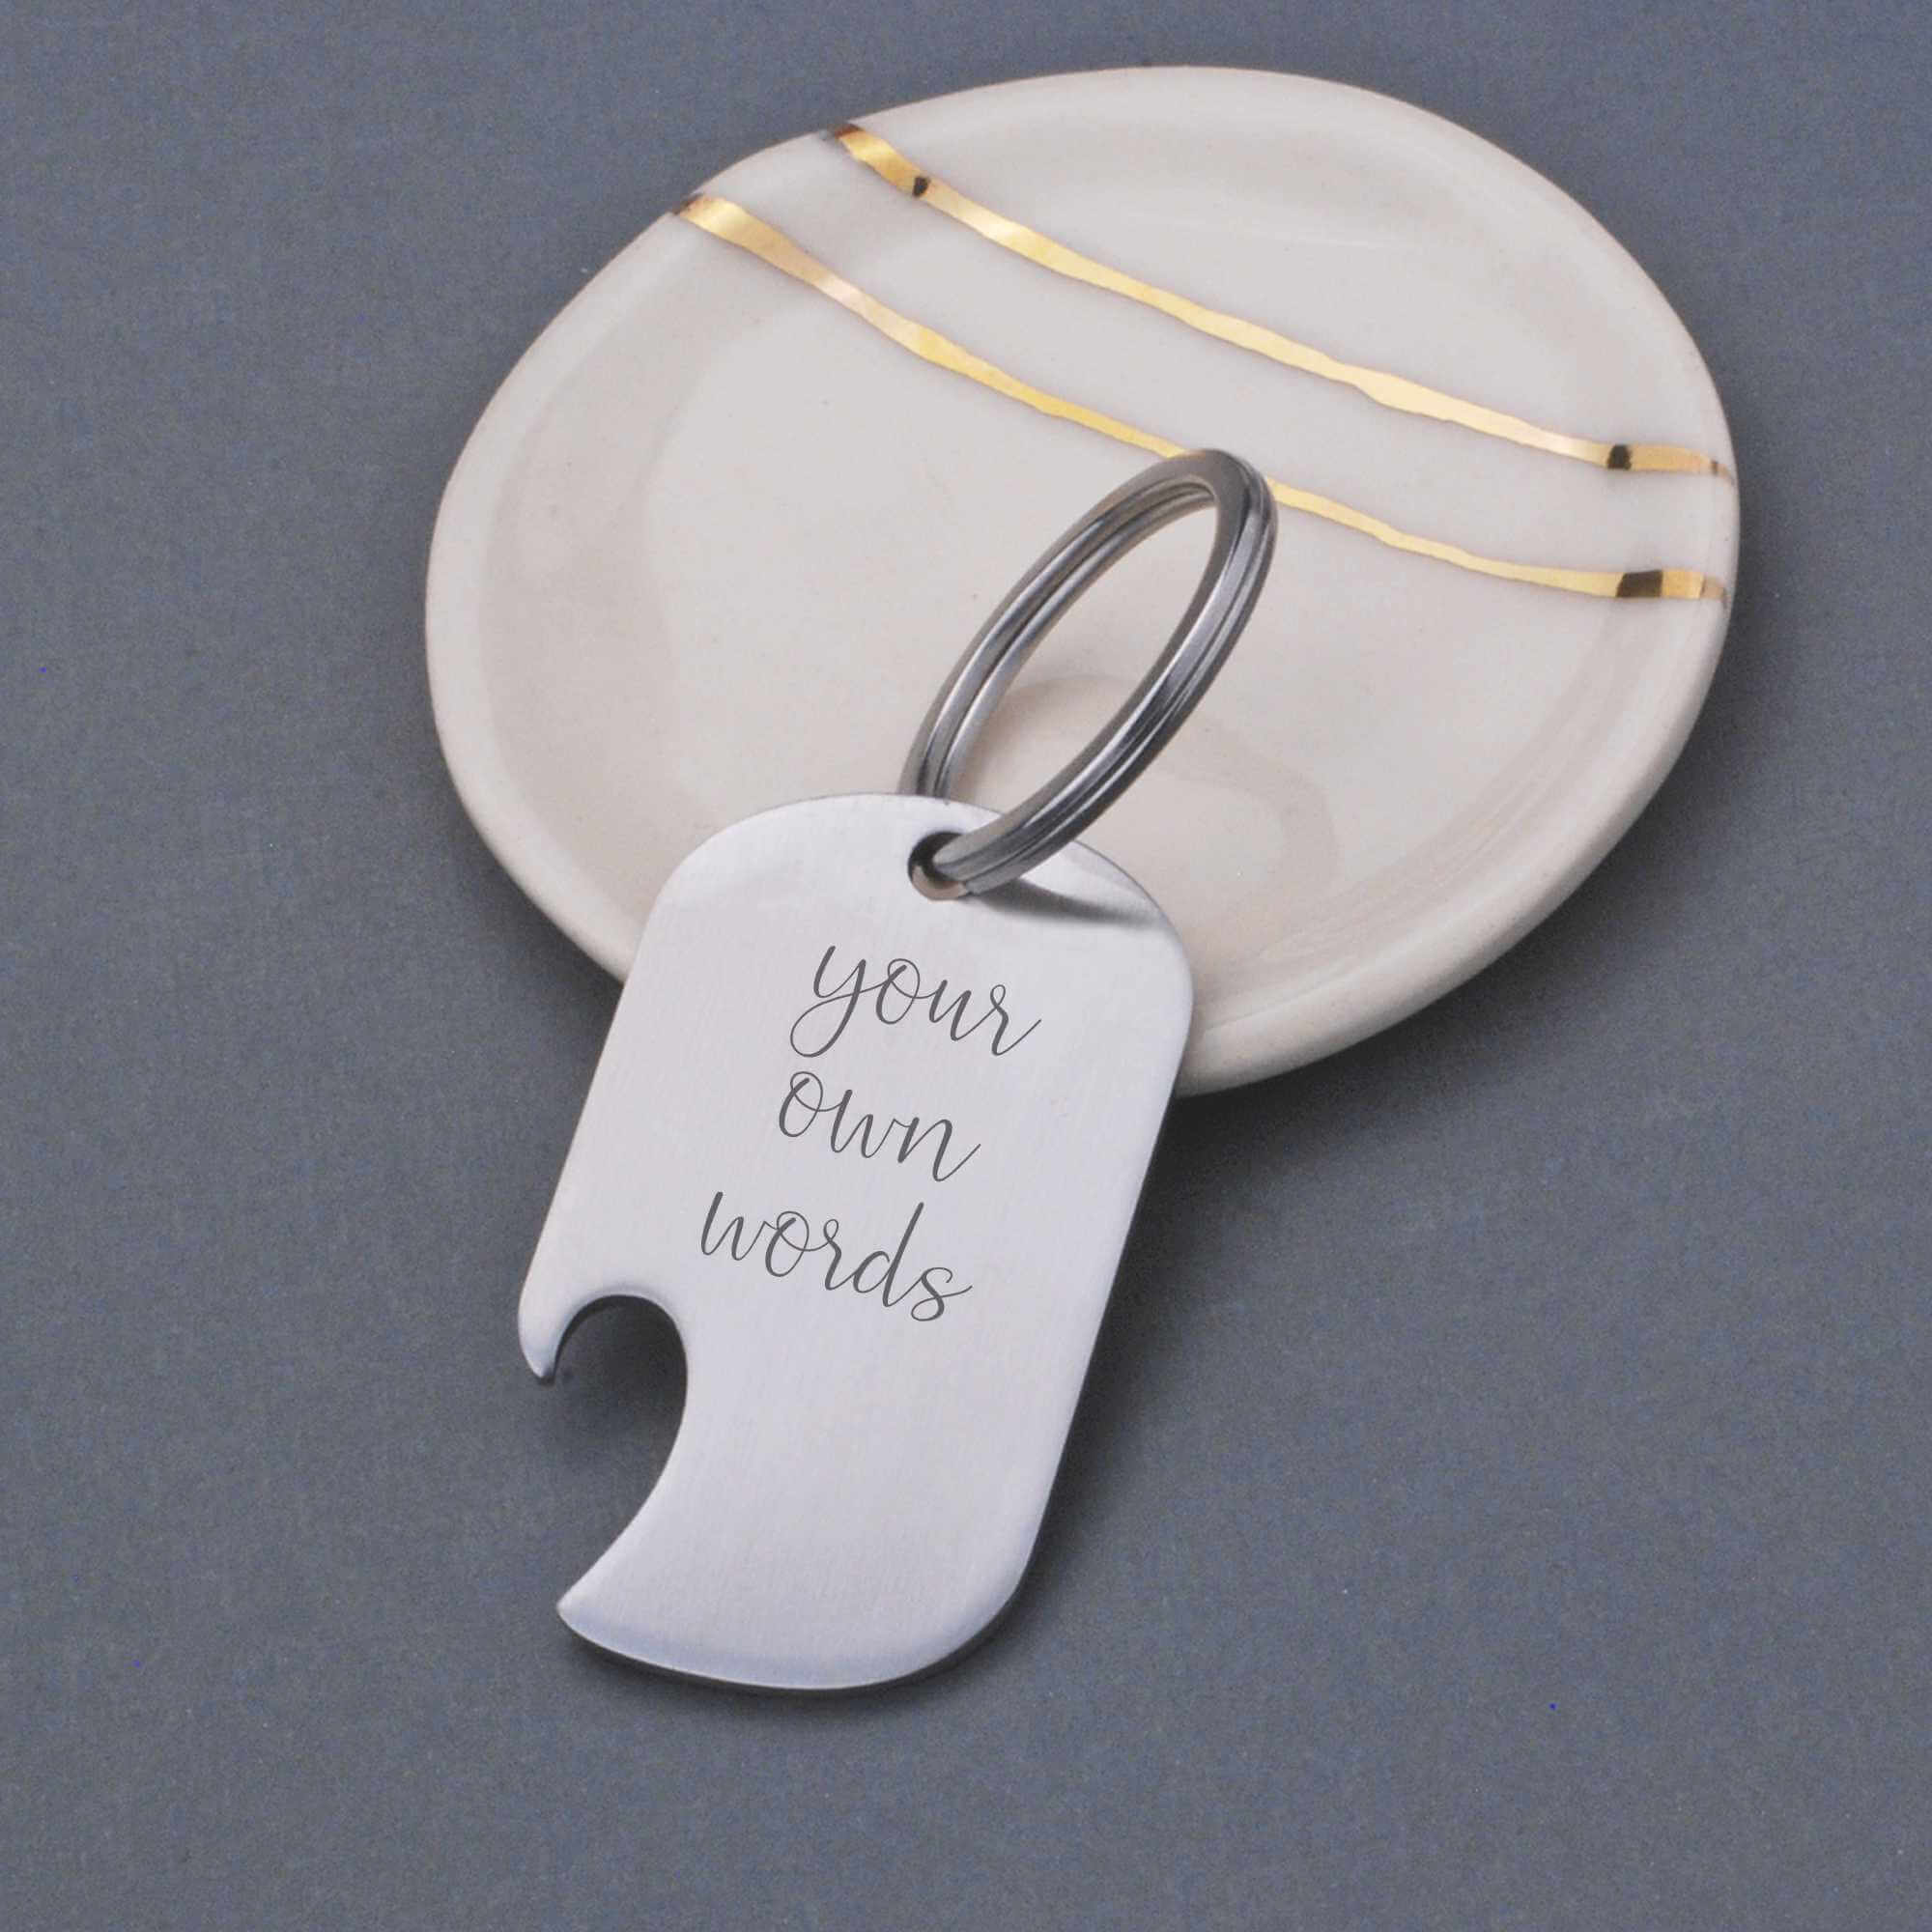 Bottle Opener Keychain Engraved with Your Own Words